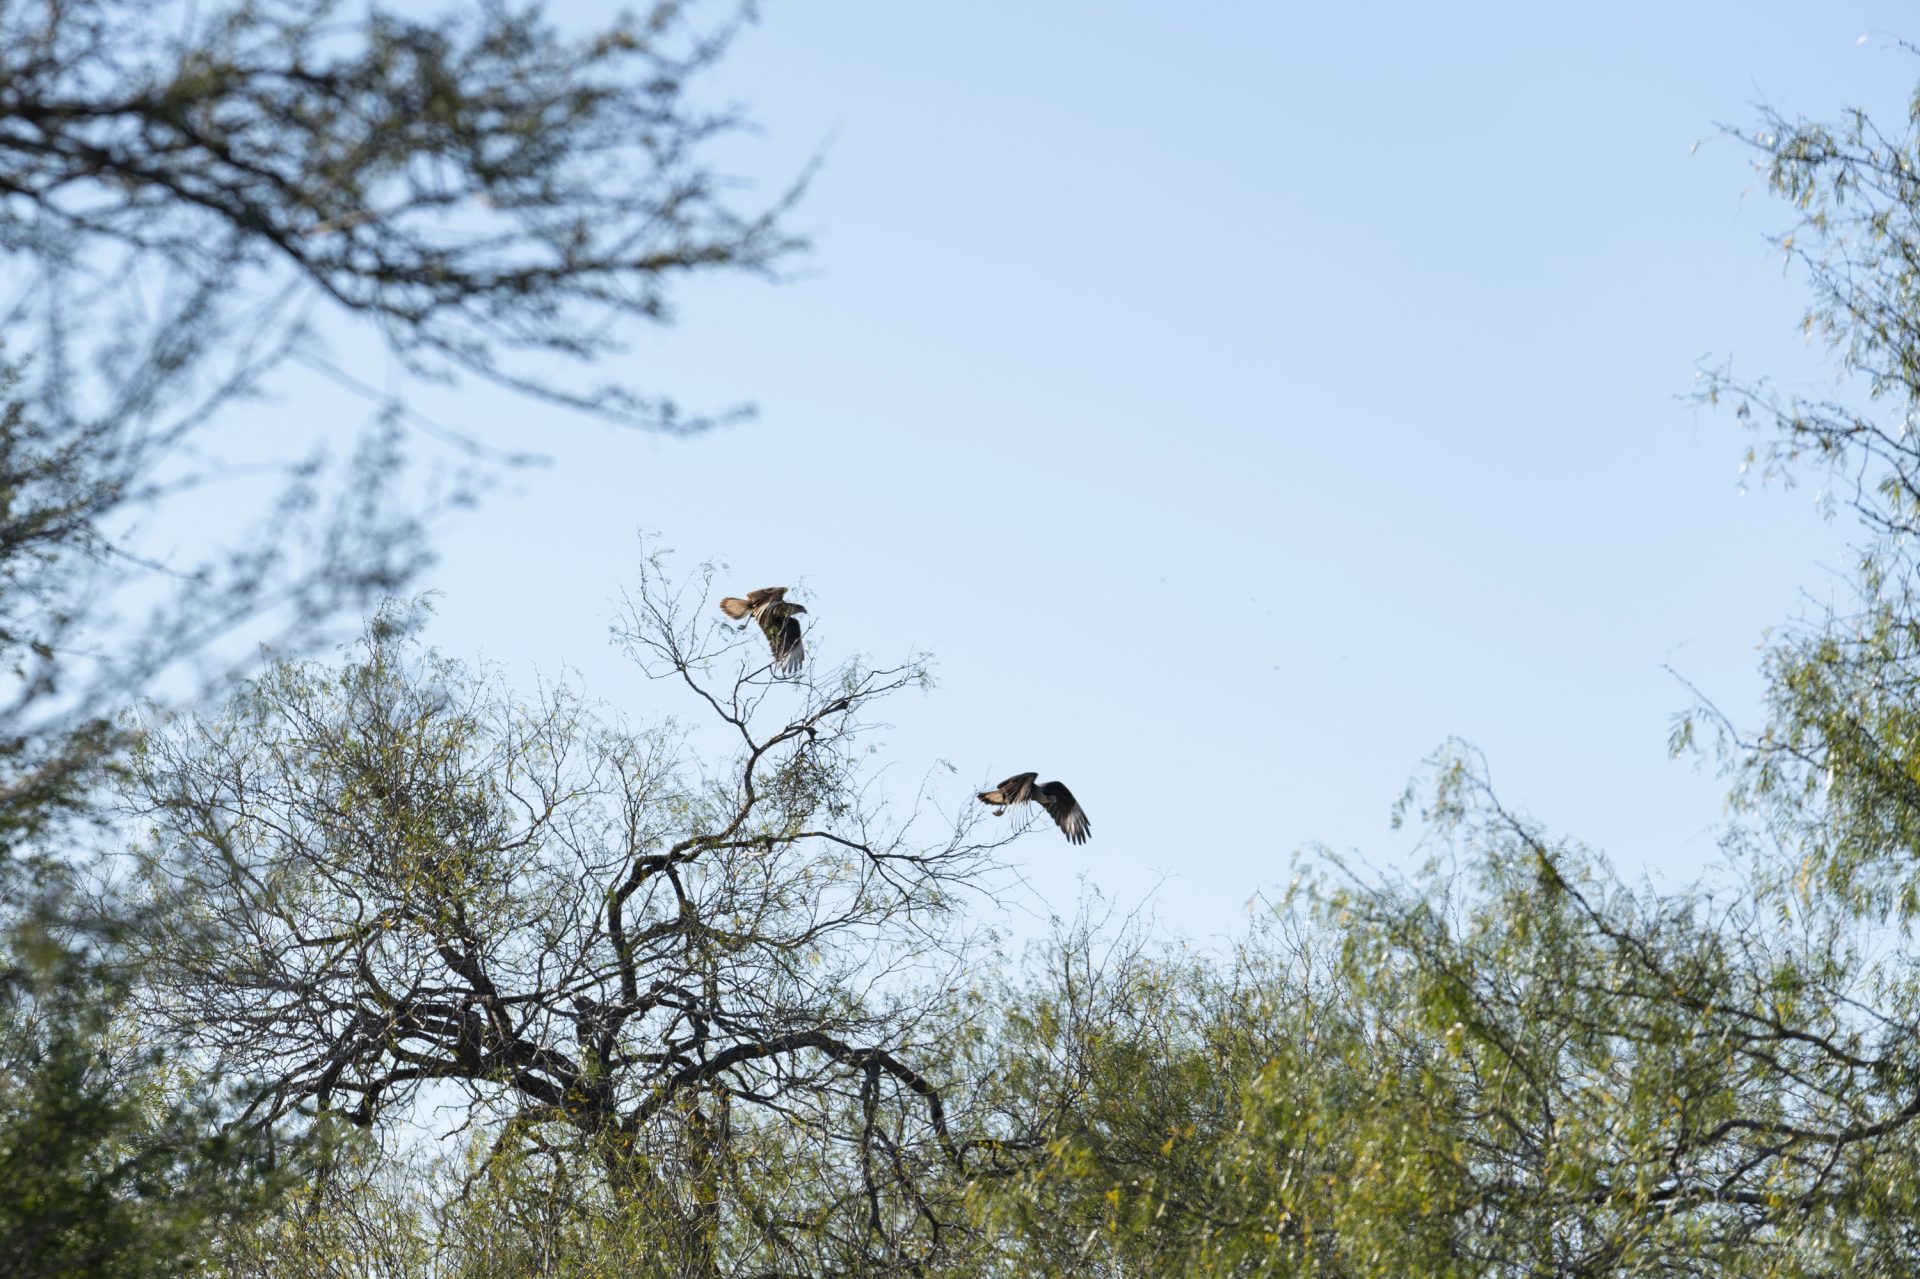 Caracaras—a raptor that often feeds on carrion—take wing near Perez's ranch. CBP says it is working with the U.S. Fish and Wildlife Service to mitigate the wall's impact on critters, but an official concedes it's not easy to protect wildlife while strengthening border security.